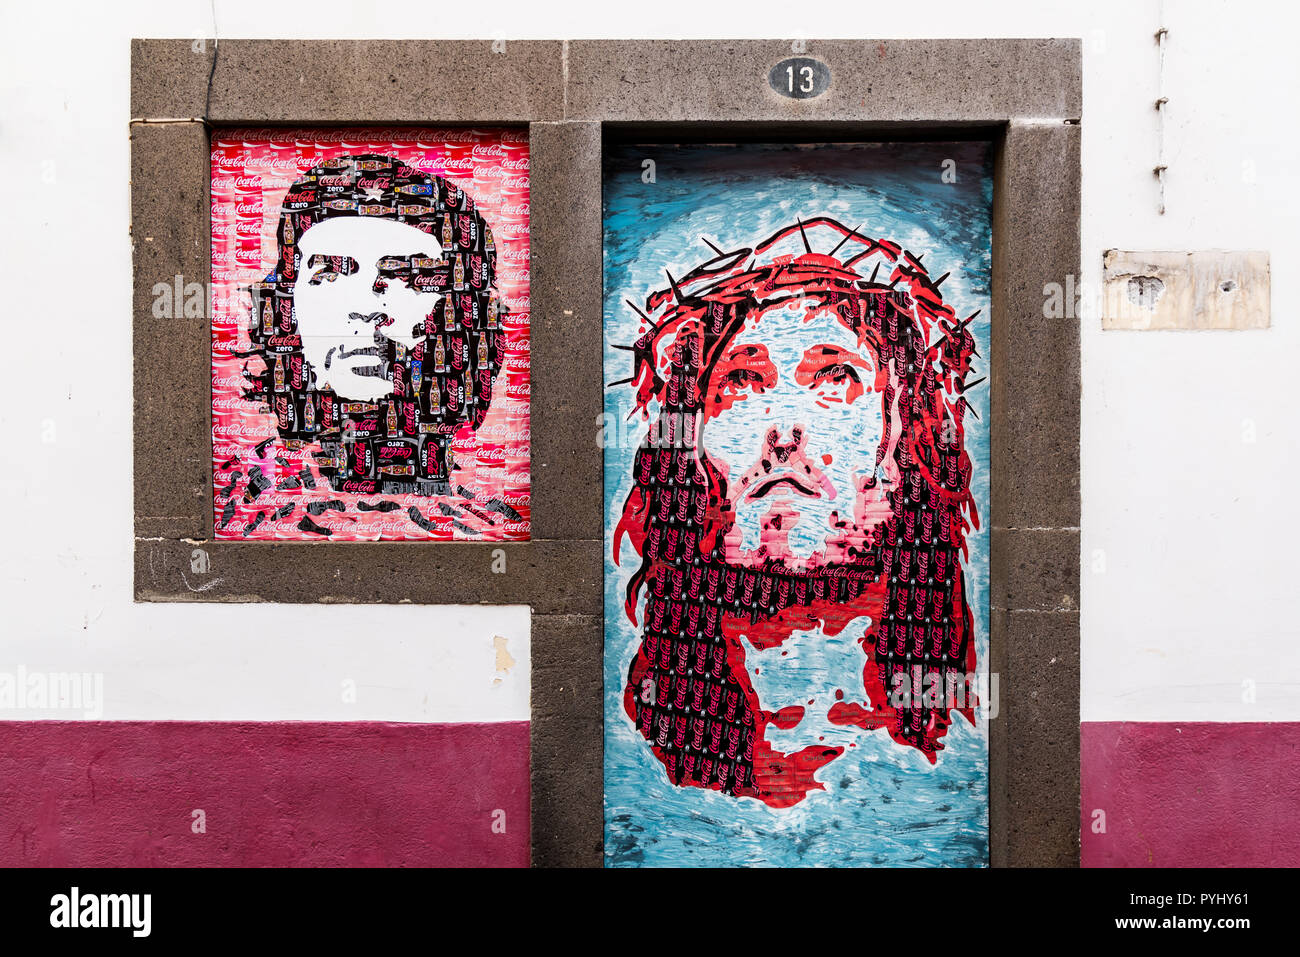 Murals on a building in Camara de Lobos, Madeira. Made from cut cans of  beverages Jesus and Che Guevara Stock Photo